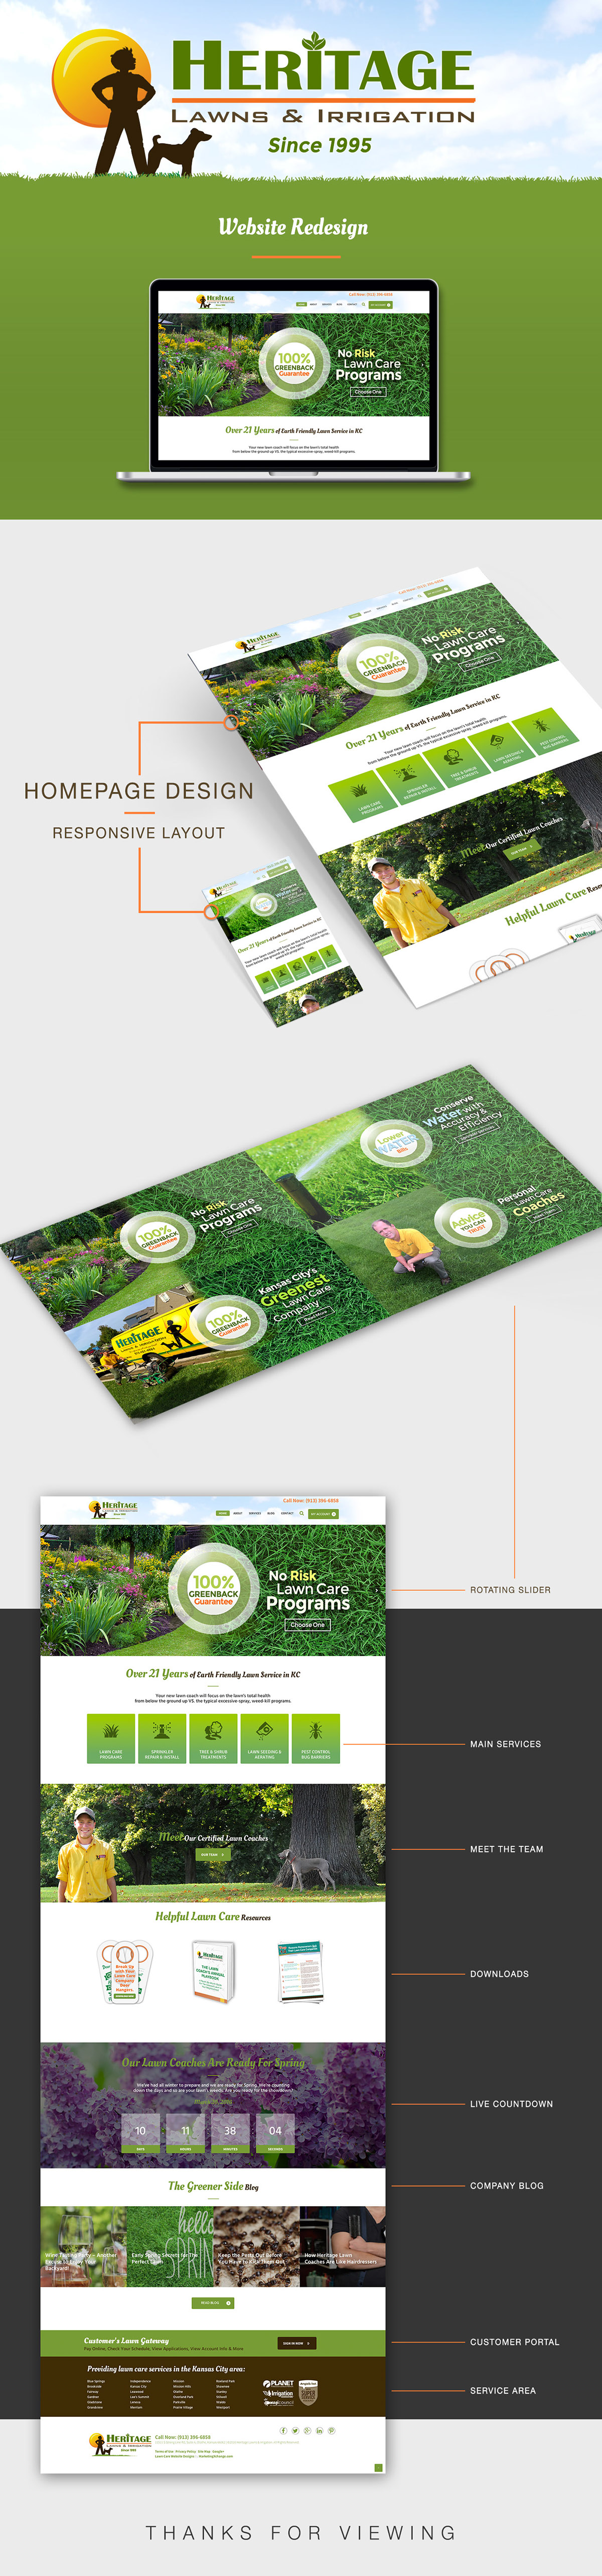 heritage lawn grass dog Website redesign homepage parallax Responsive Web agency